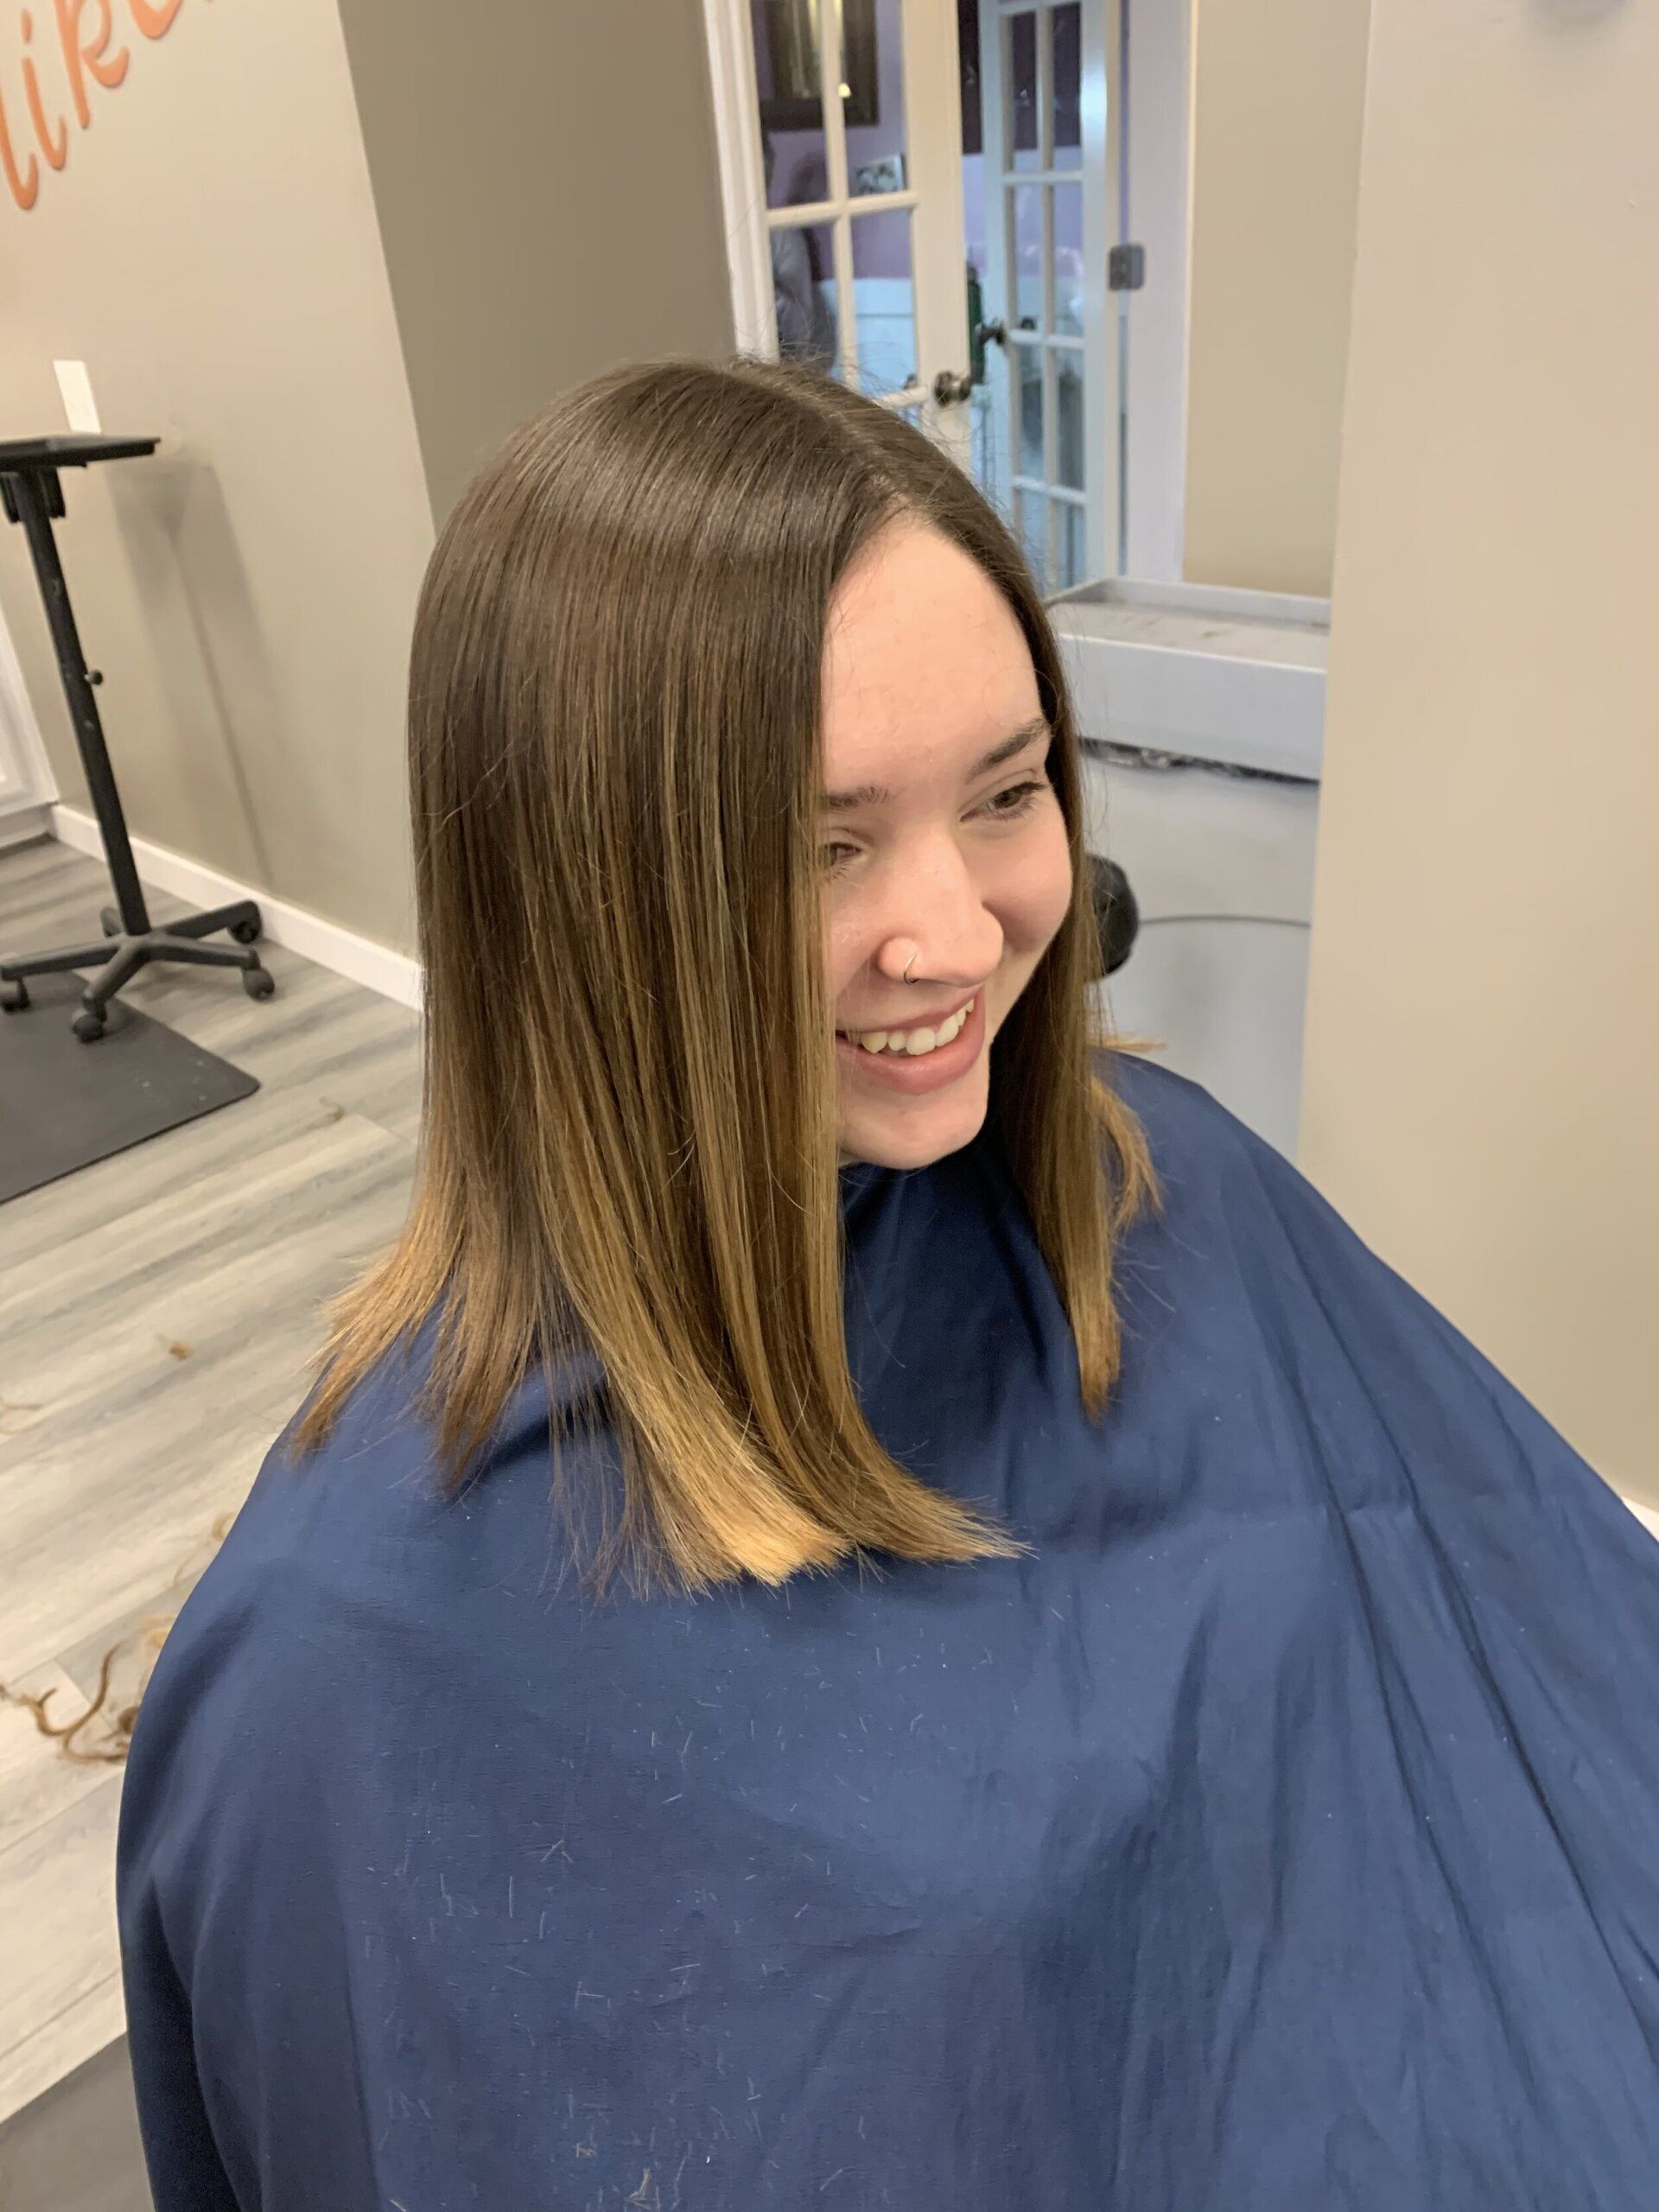 About six months later Gianna decided she would like to have a LOB haircut. Here you can see how her Balalyage remains and worked in beautifully with her new look.